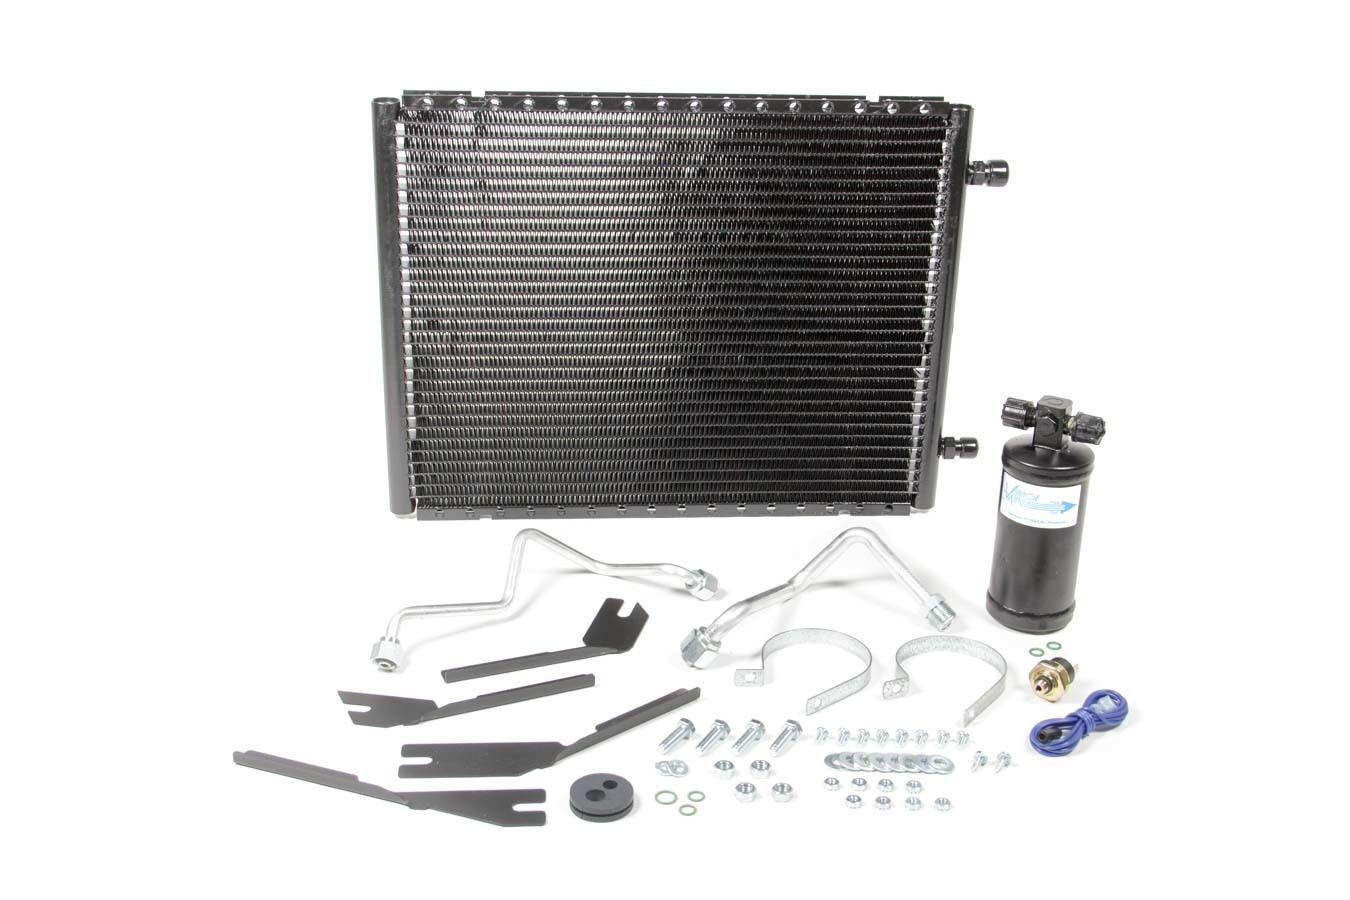 Vintage Air 022665 Air Conditioning Condenser and Drier, SuperFlow, Horizontal, 18 x 14 x 13/16 in, 6 AN / 8 AN Male O-Ring Fittings, Aluminum, Black Paint, GM X-Body 1962-67, Kit